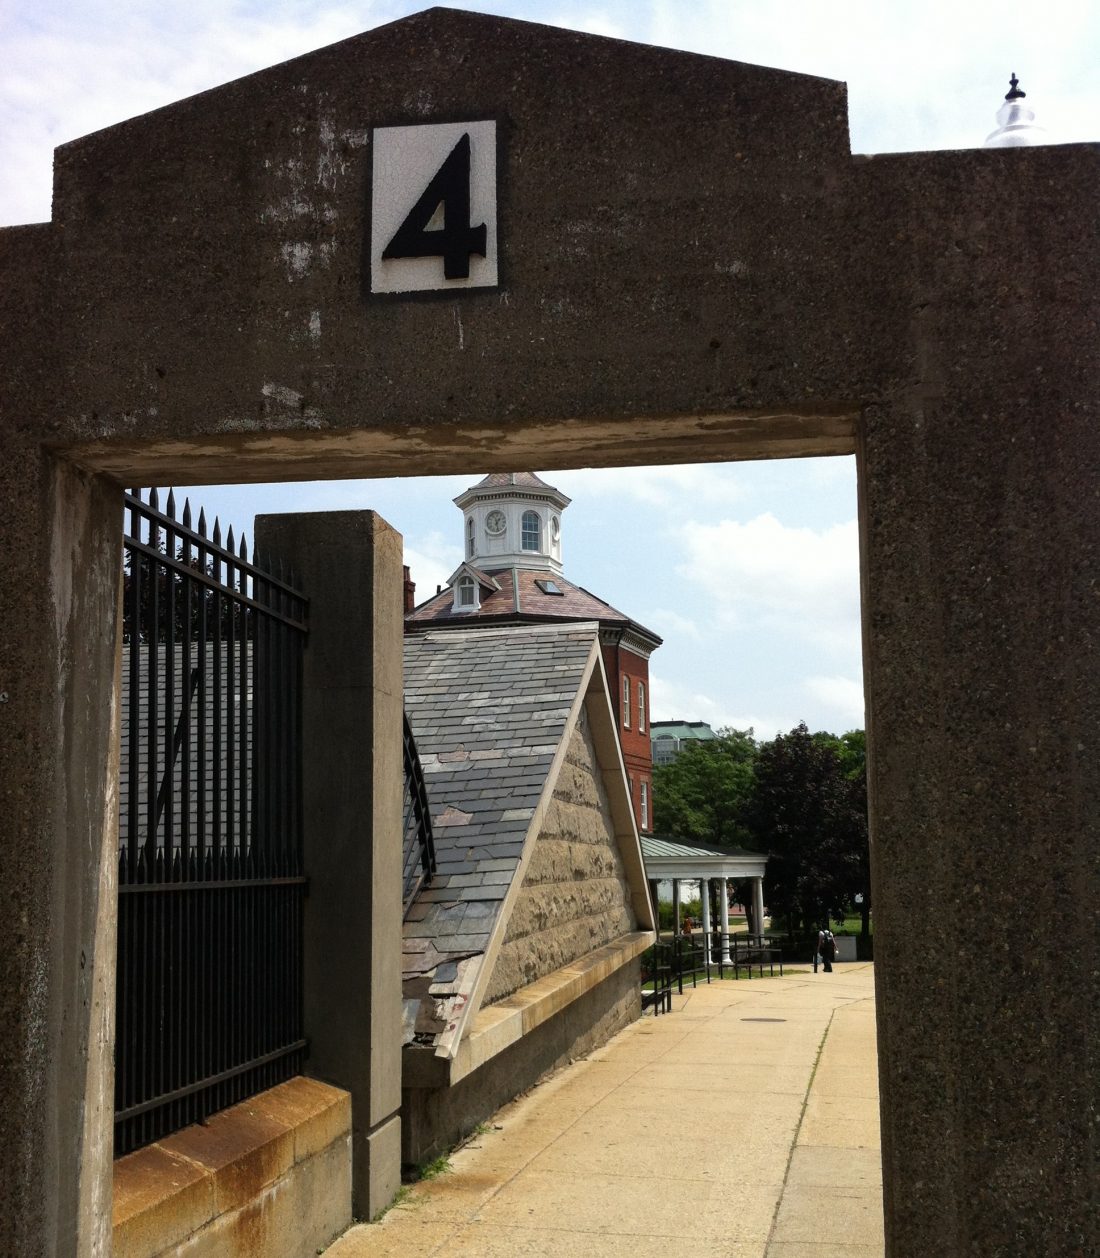 Gate 4 at the Charlestown Navy Yard in Boston. Through the gate you can see the Ropewalk and the Muster House (Photo: Sarah Sundin, July 2014)